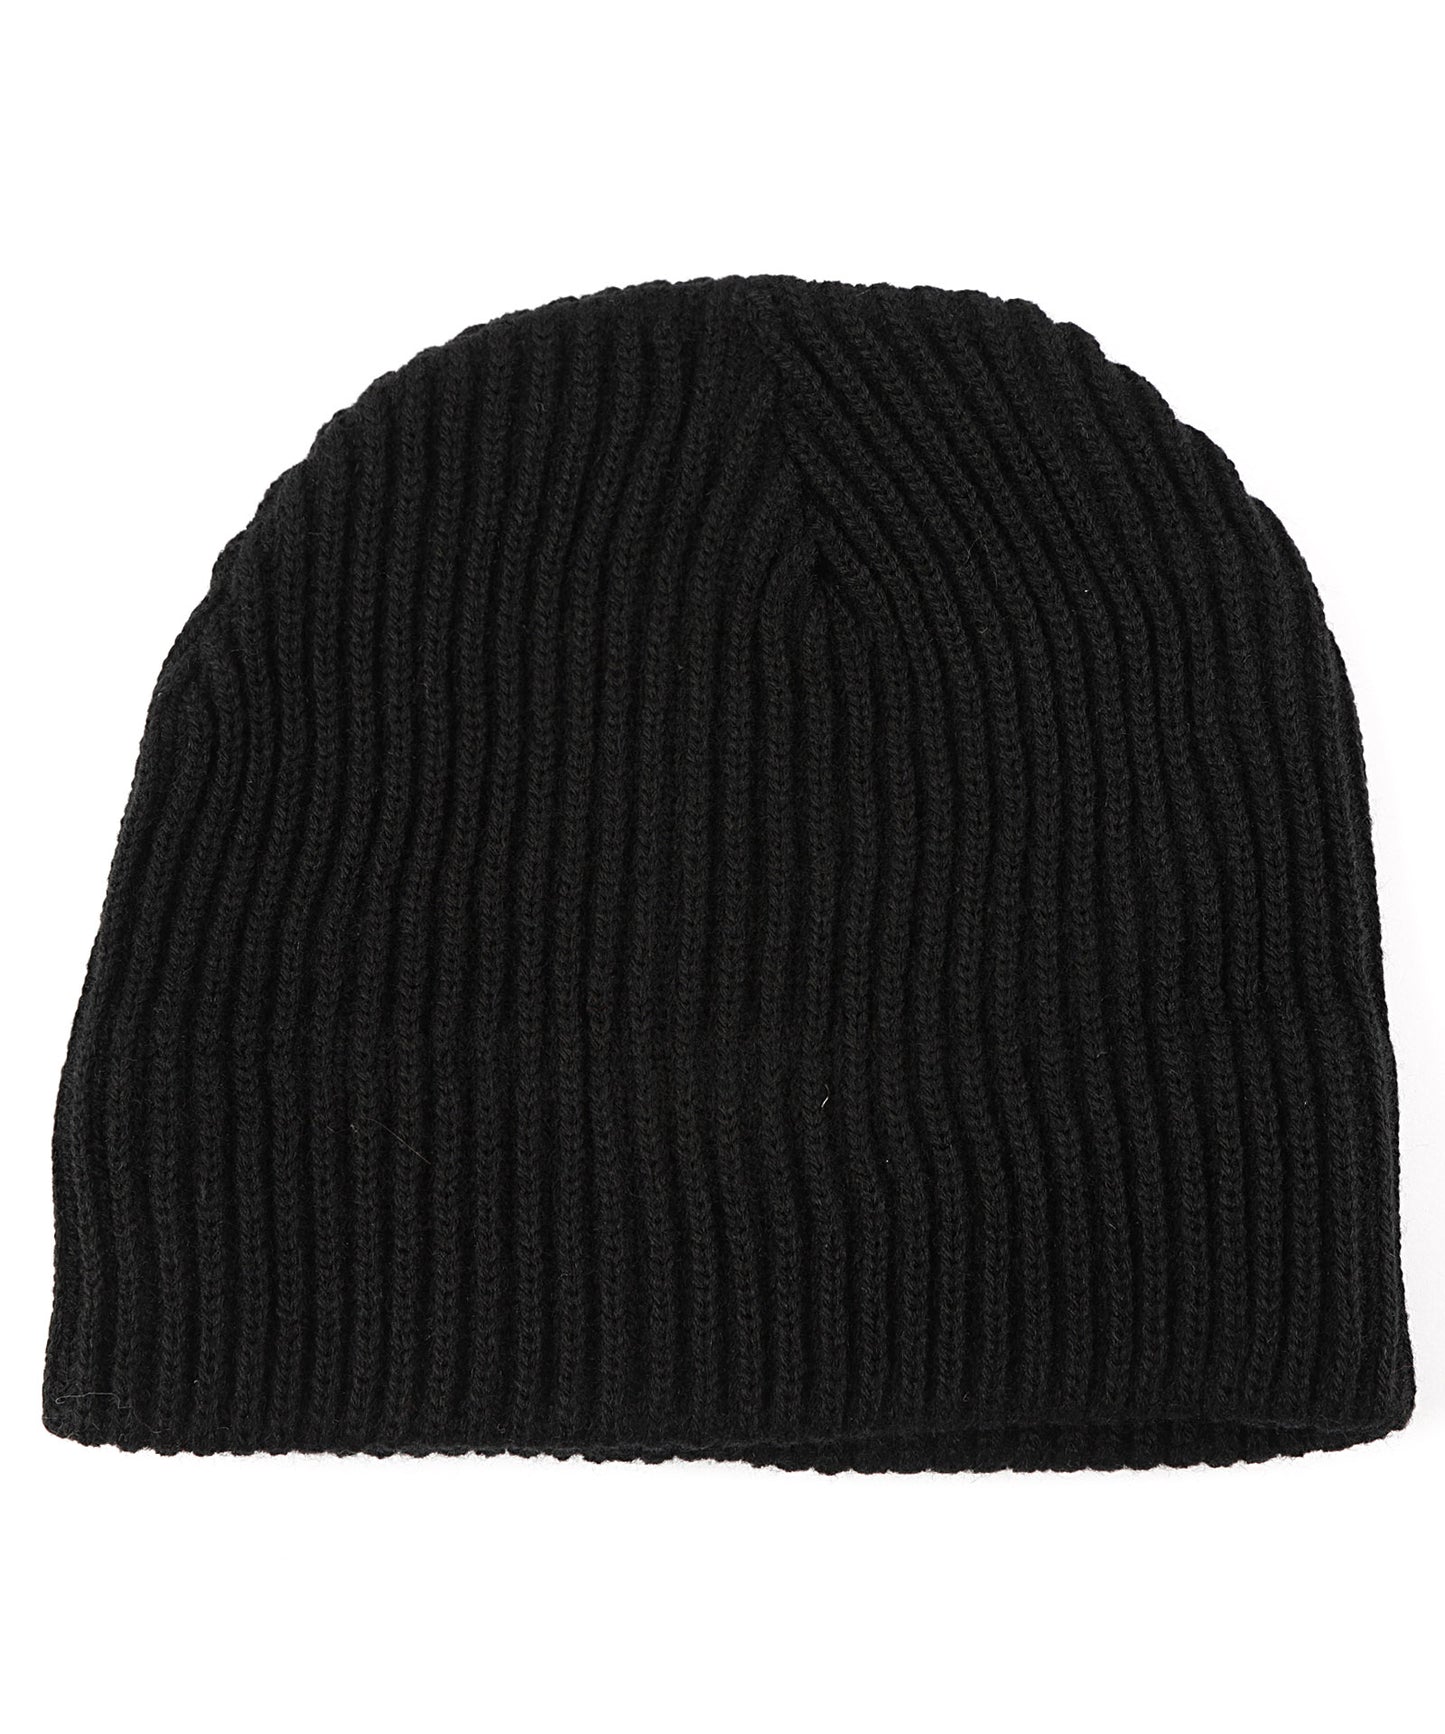 Unisex Knitted Cap